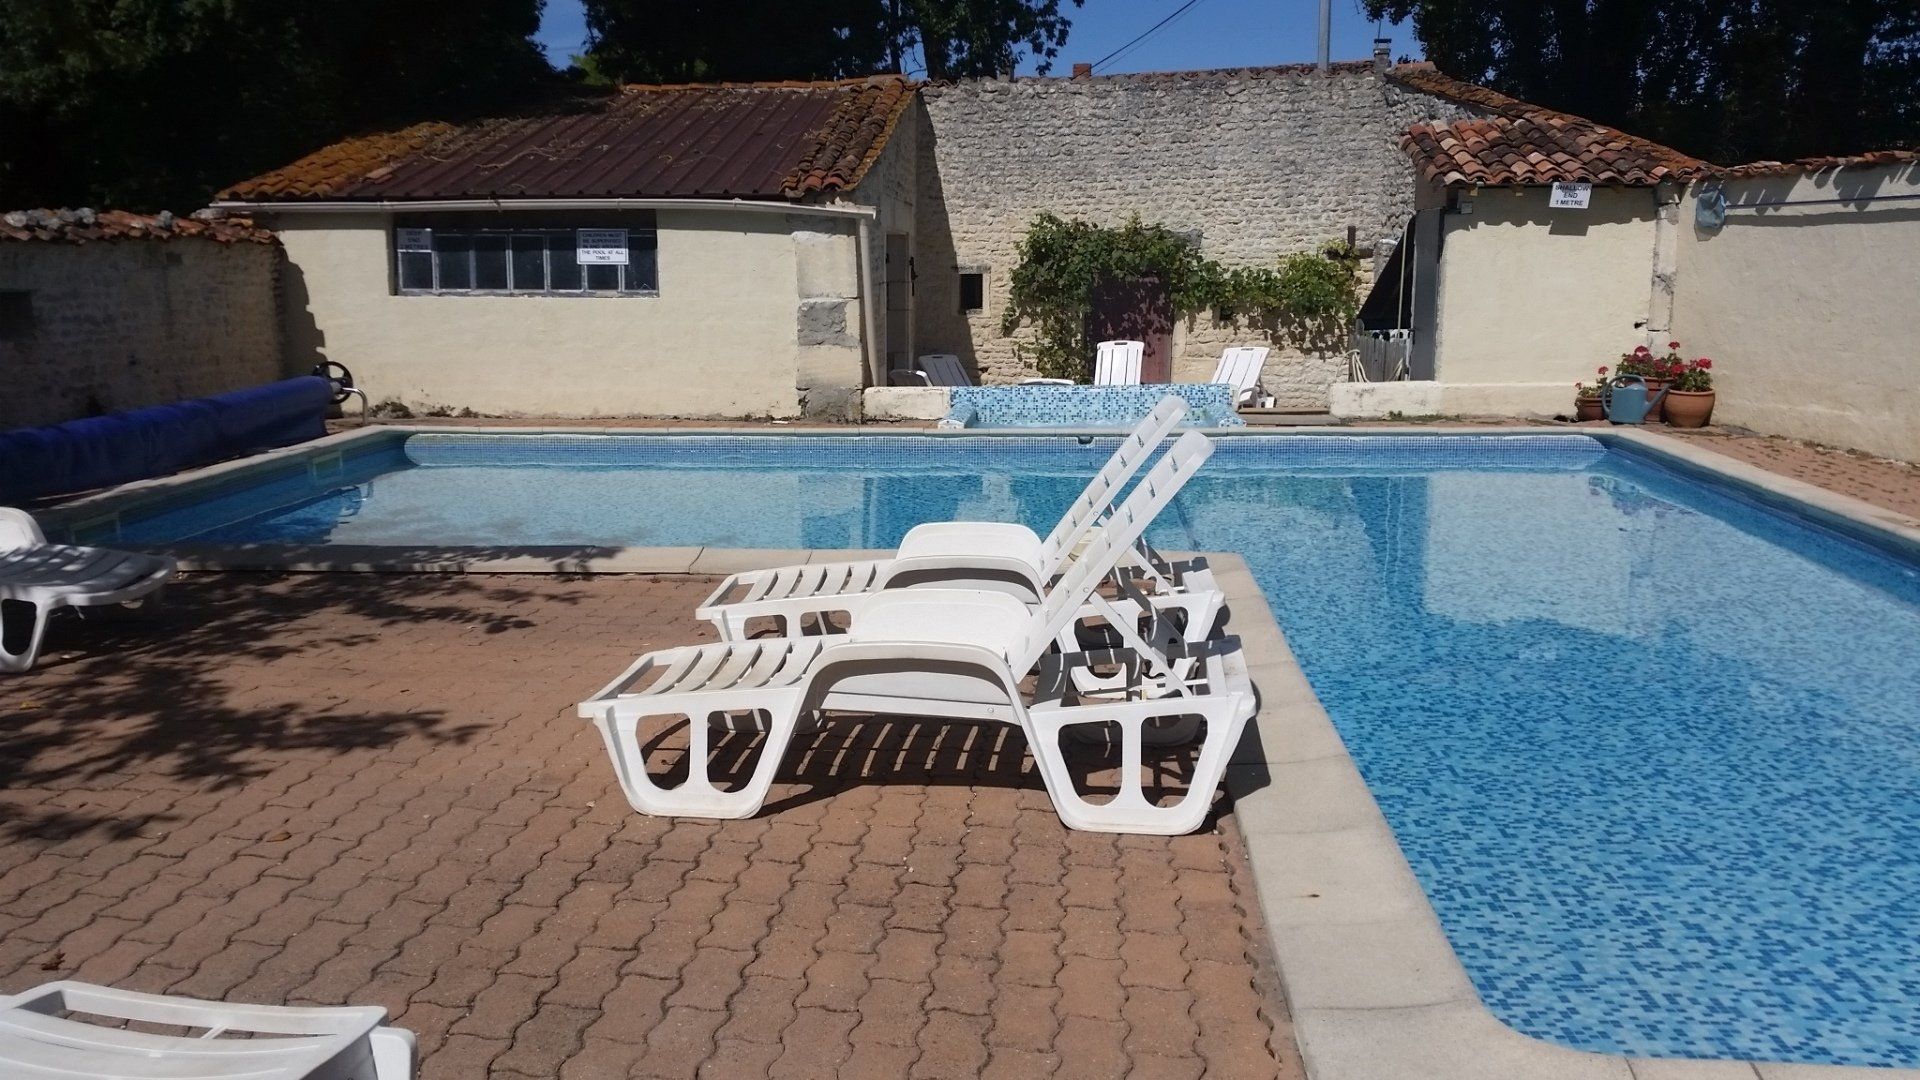 Cygne pool side holiday cottage Les Vallaies